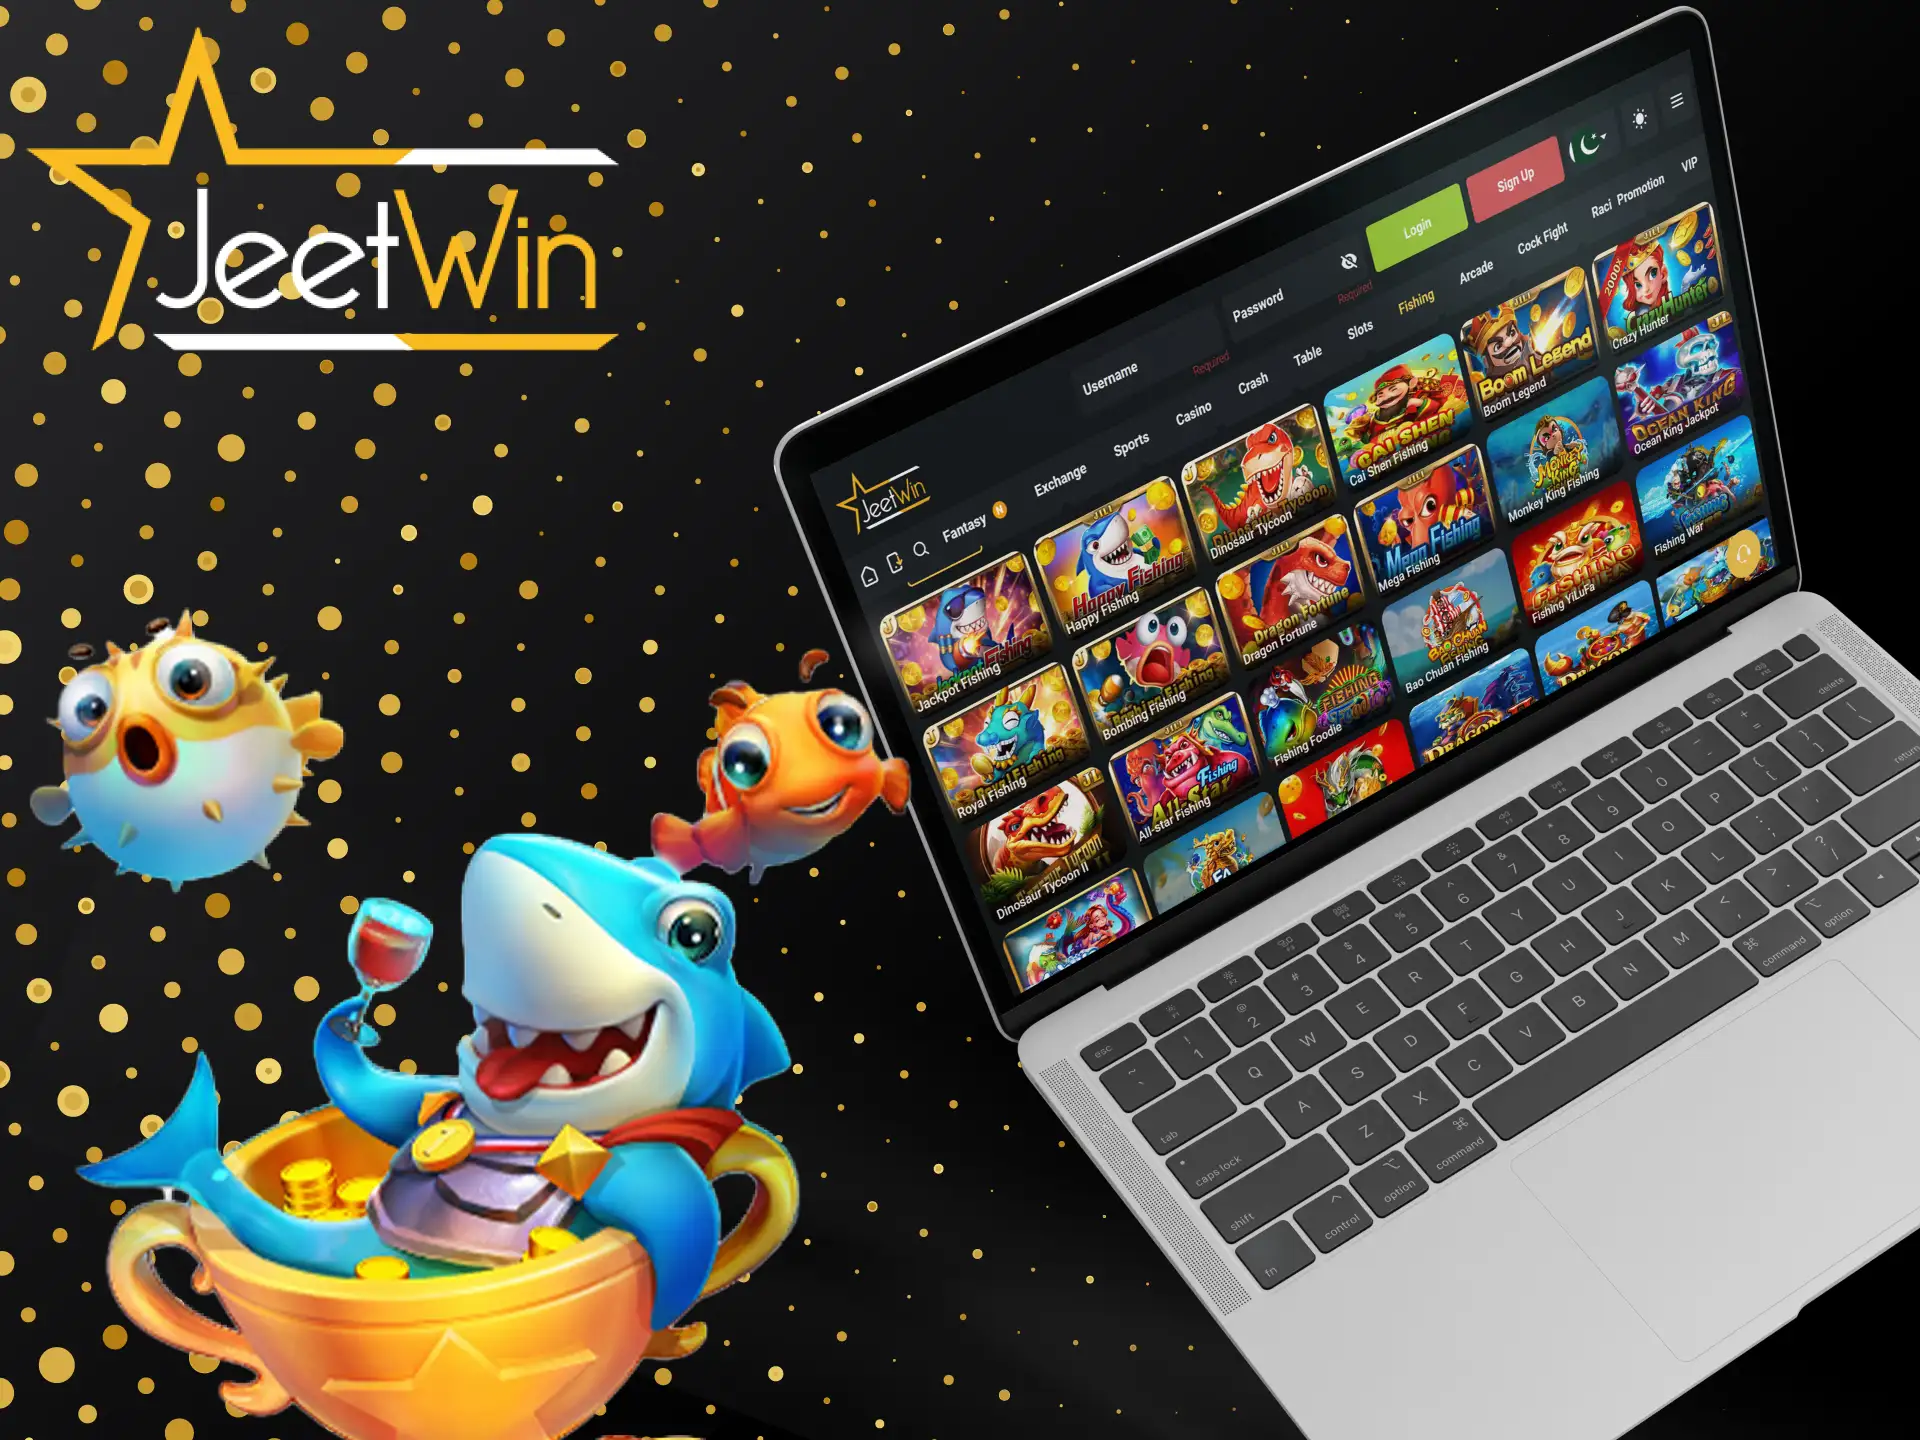 Open the JeetWin site, shoot the fish and win.